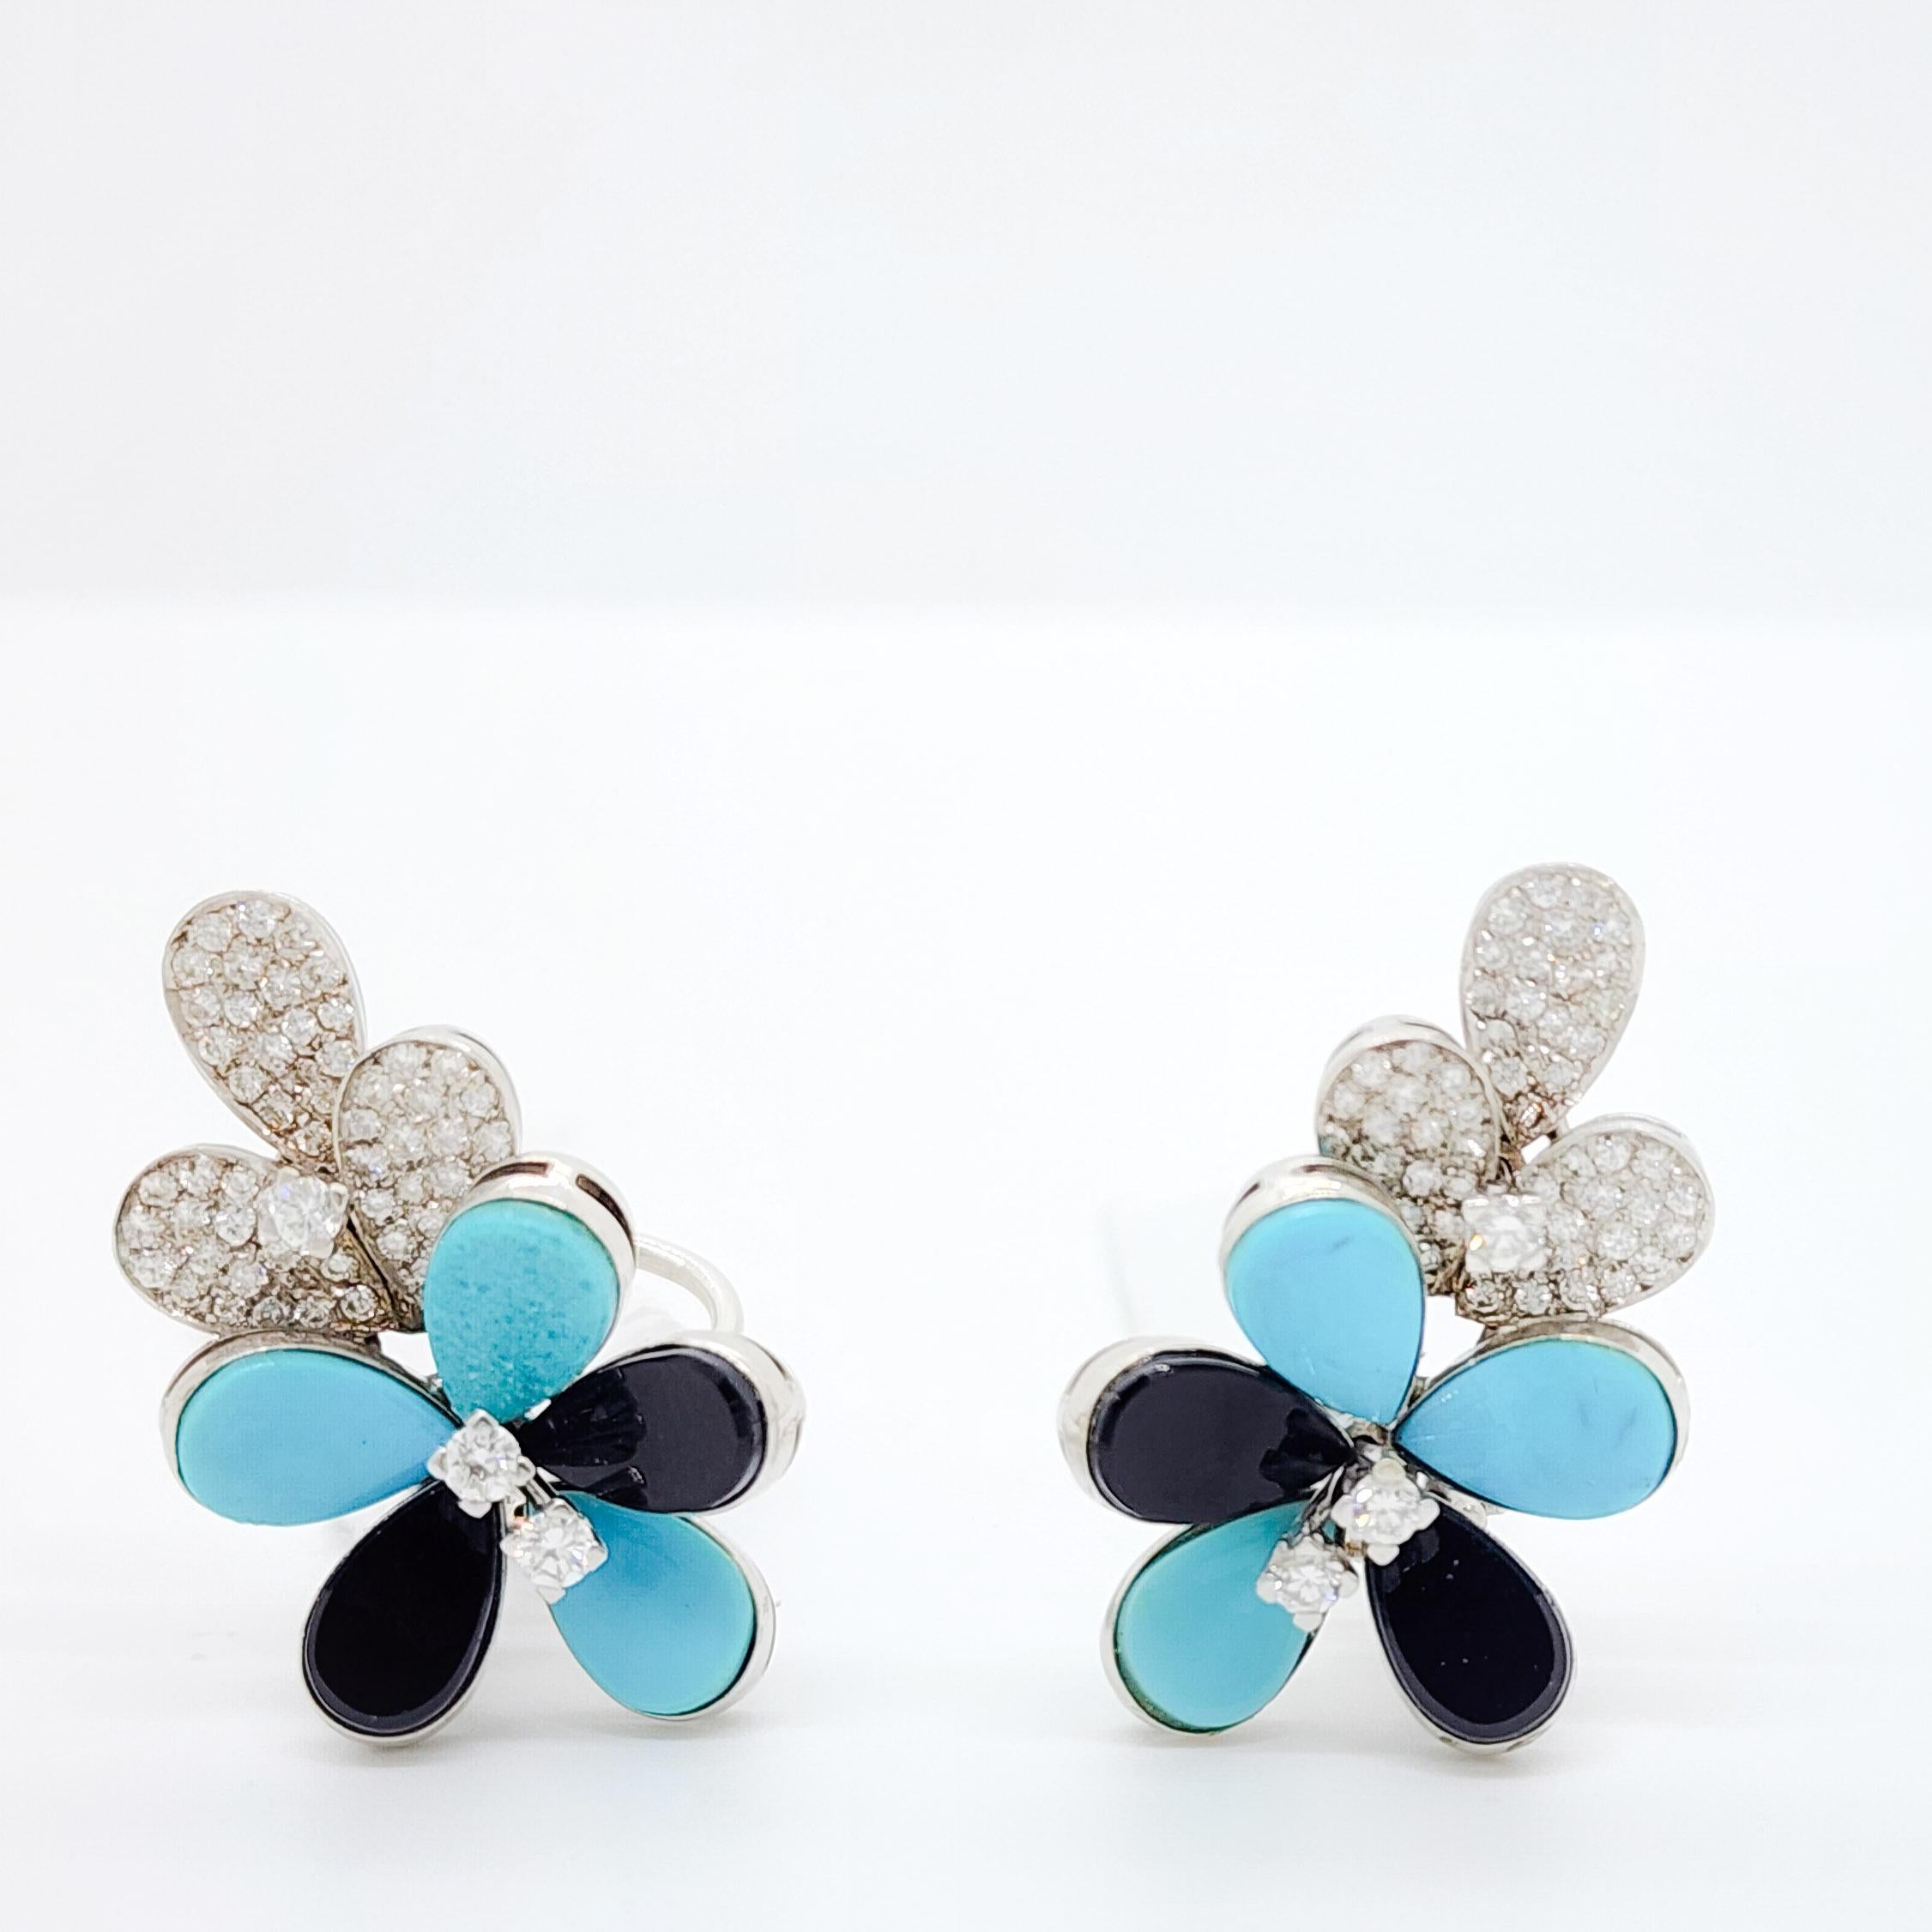 Gorgeous turquoise pear shapes and 1.50 ct. good quality white diamond round floral cluster earrings handmade in 18k white gold.  Has matching ring and necklace.  